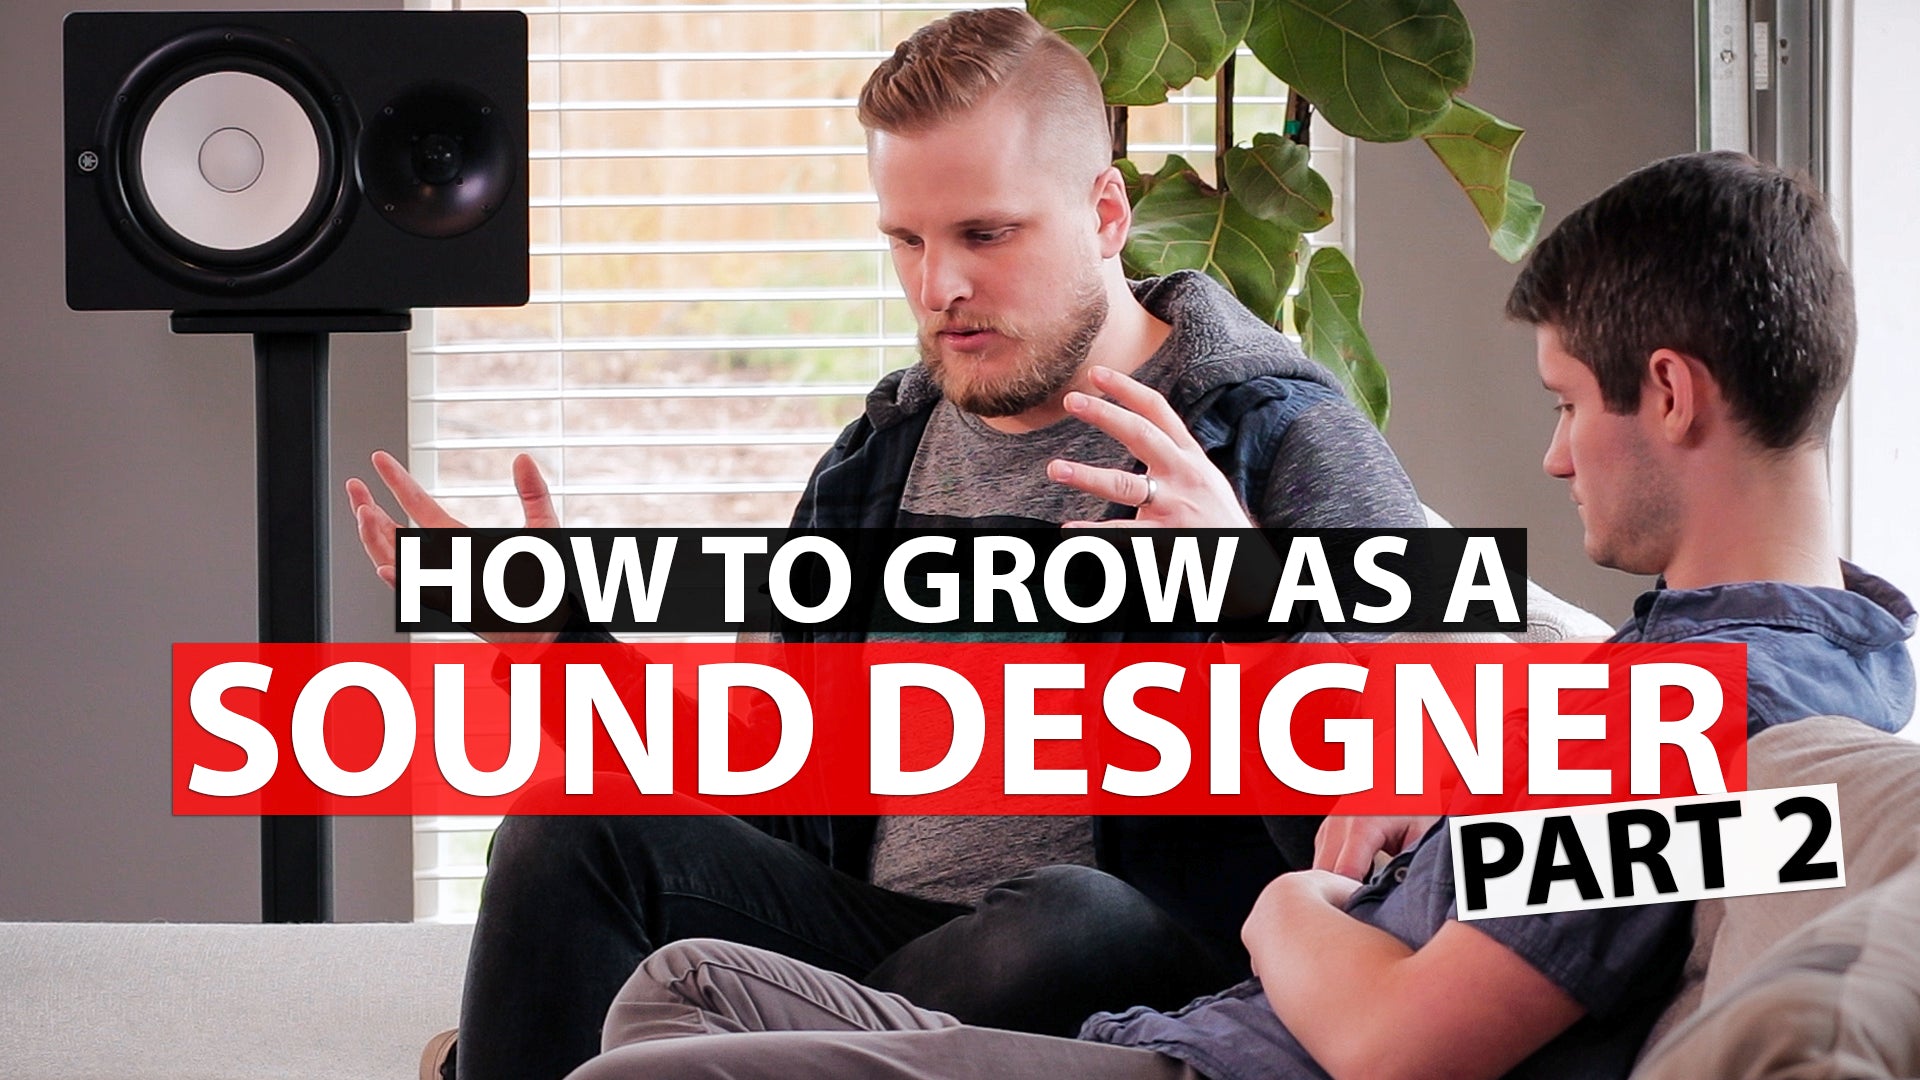 How to Grow as a Sound Designer with David and Ryan from Sunday Sounds - Part 2